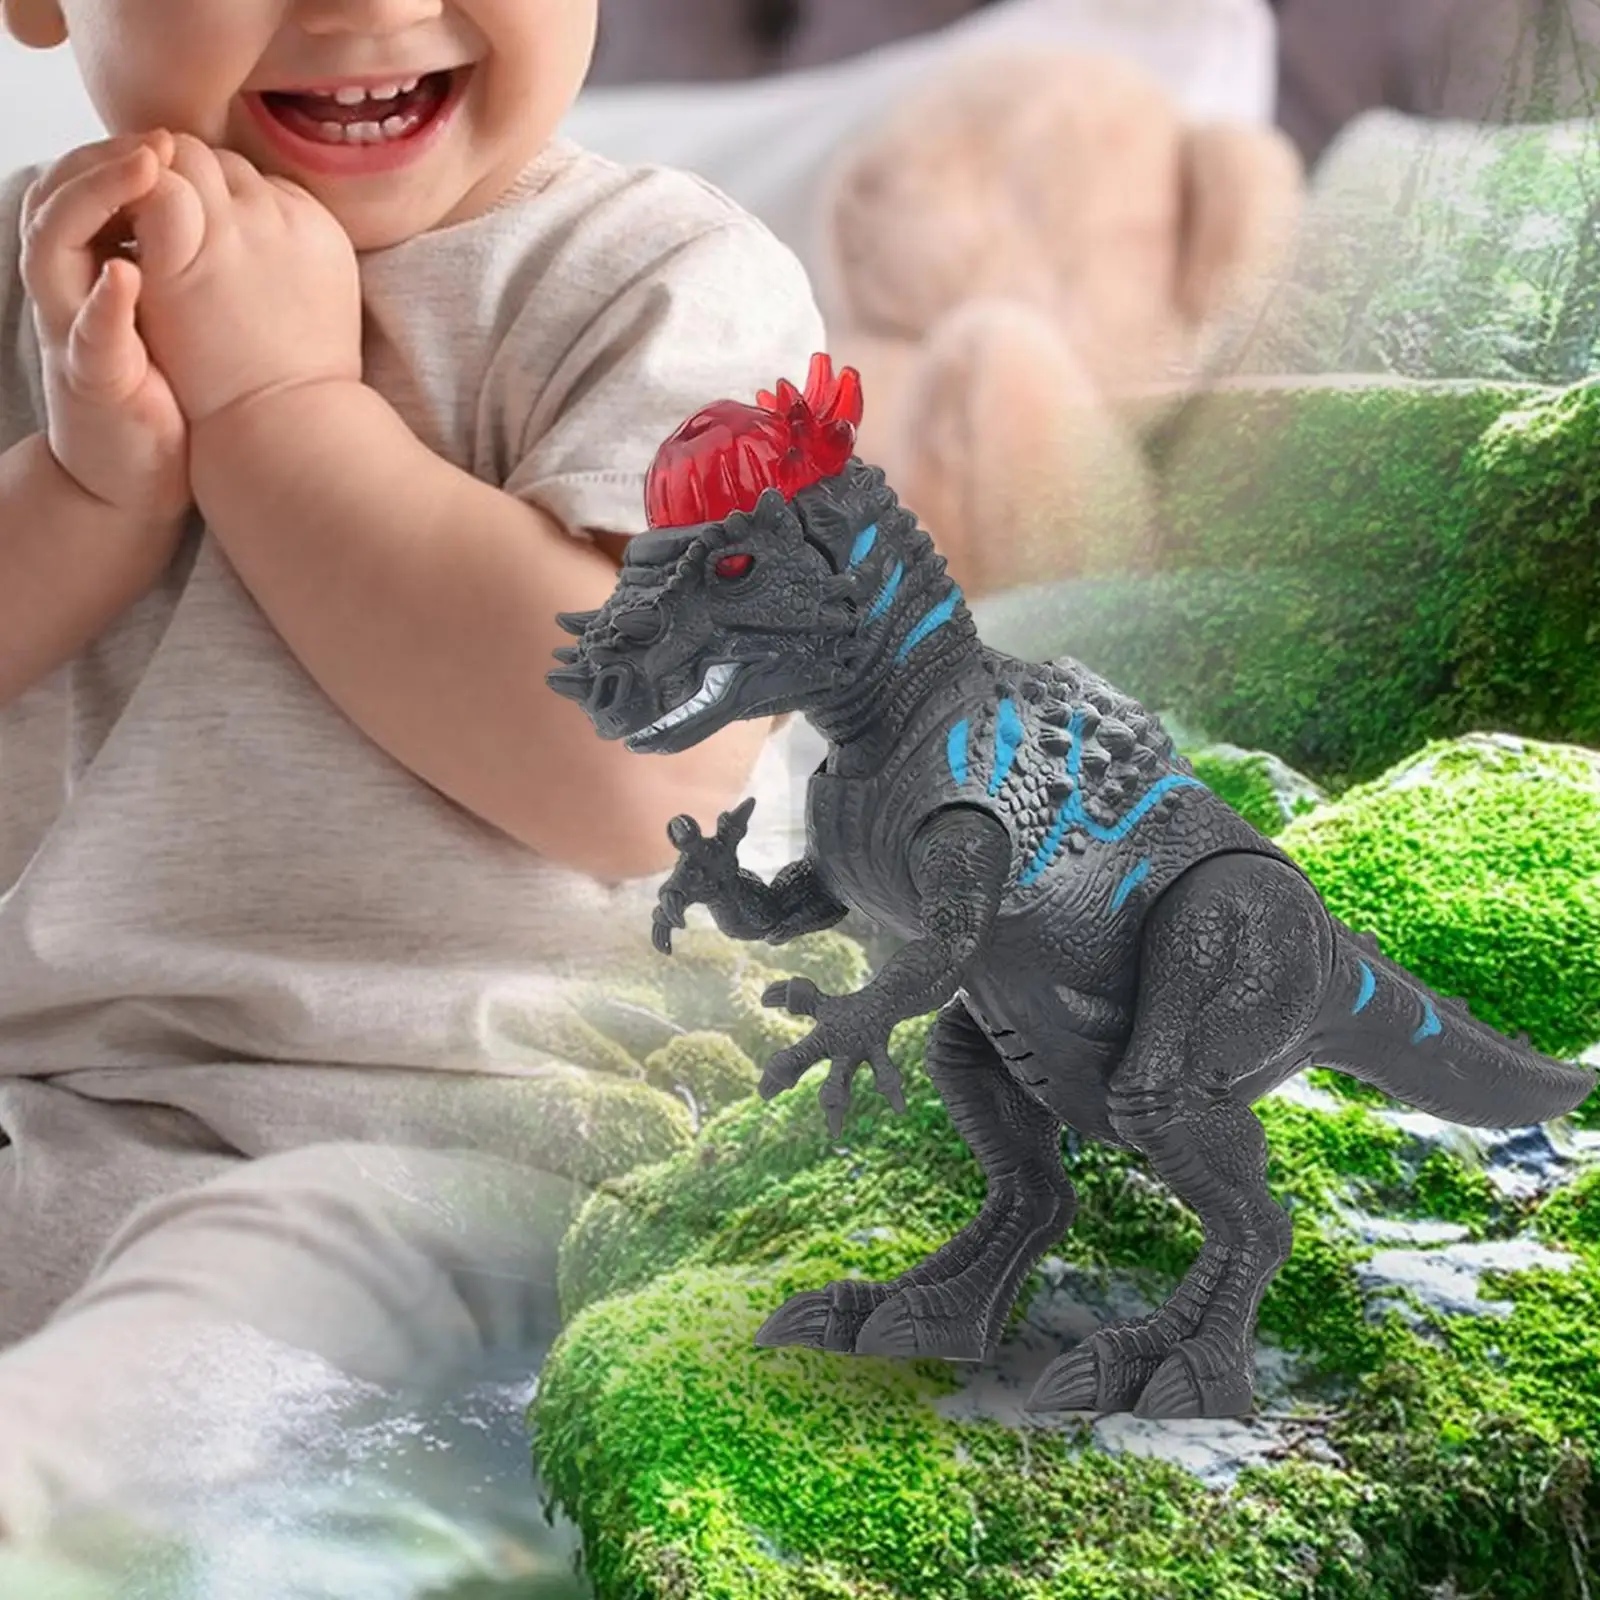 Dinosaur Toy for Kids Action Figure with Lights Mechanical Swing Arm Electric Walking Robot Dinosaur for Boys Girls 3 5, 4 7,8